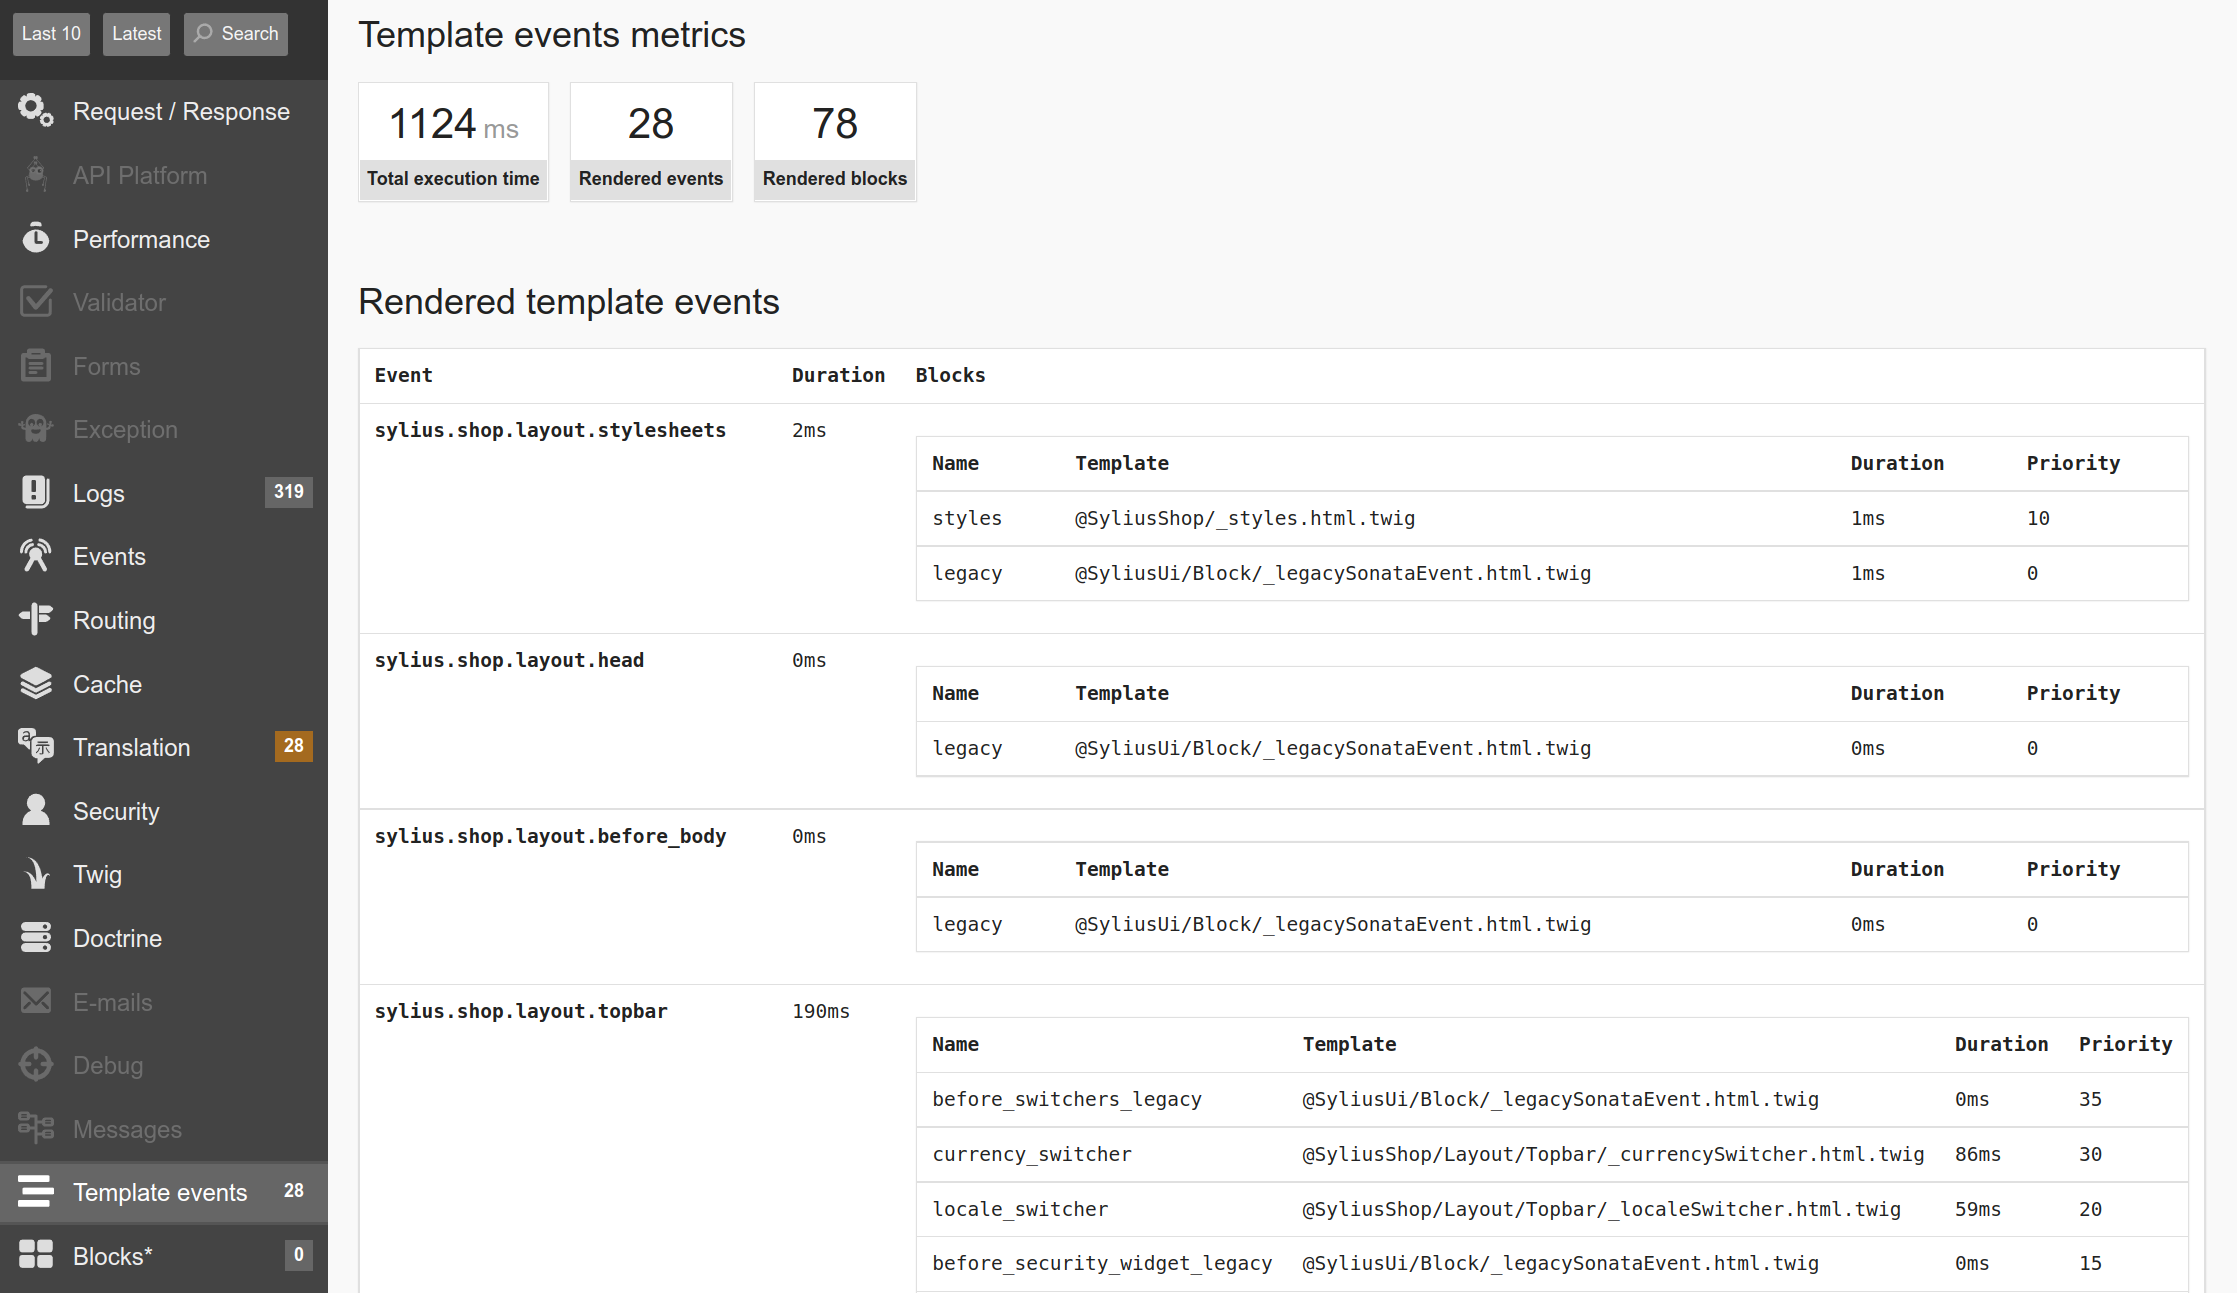 ../_images/sylius_template_events_metrics.png